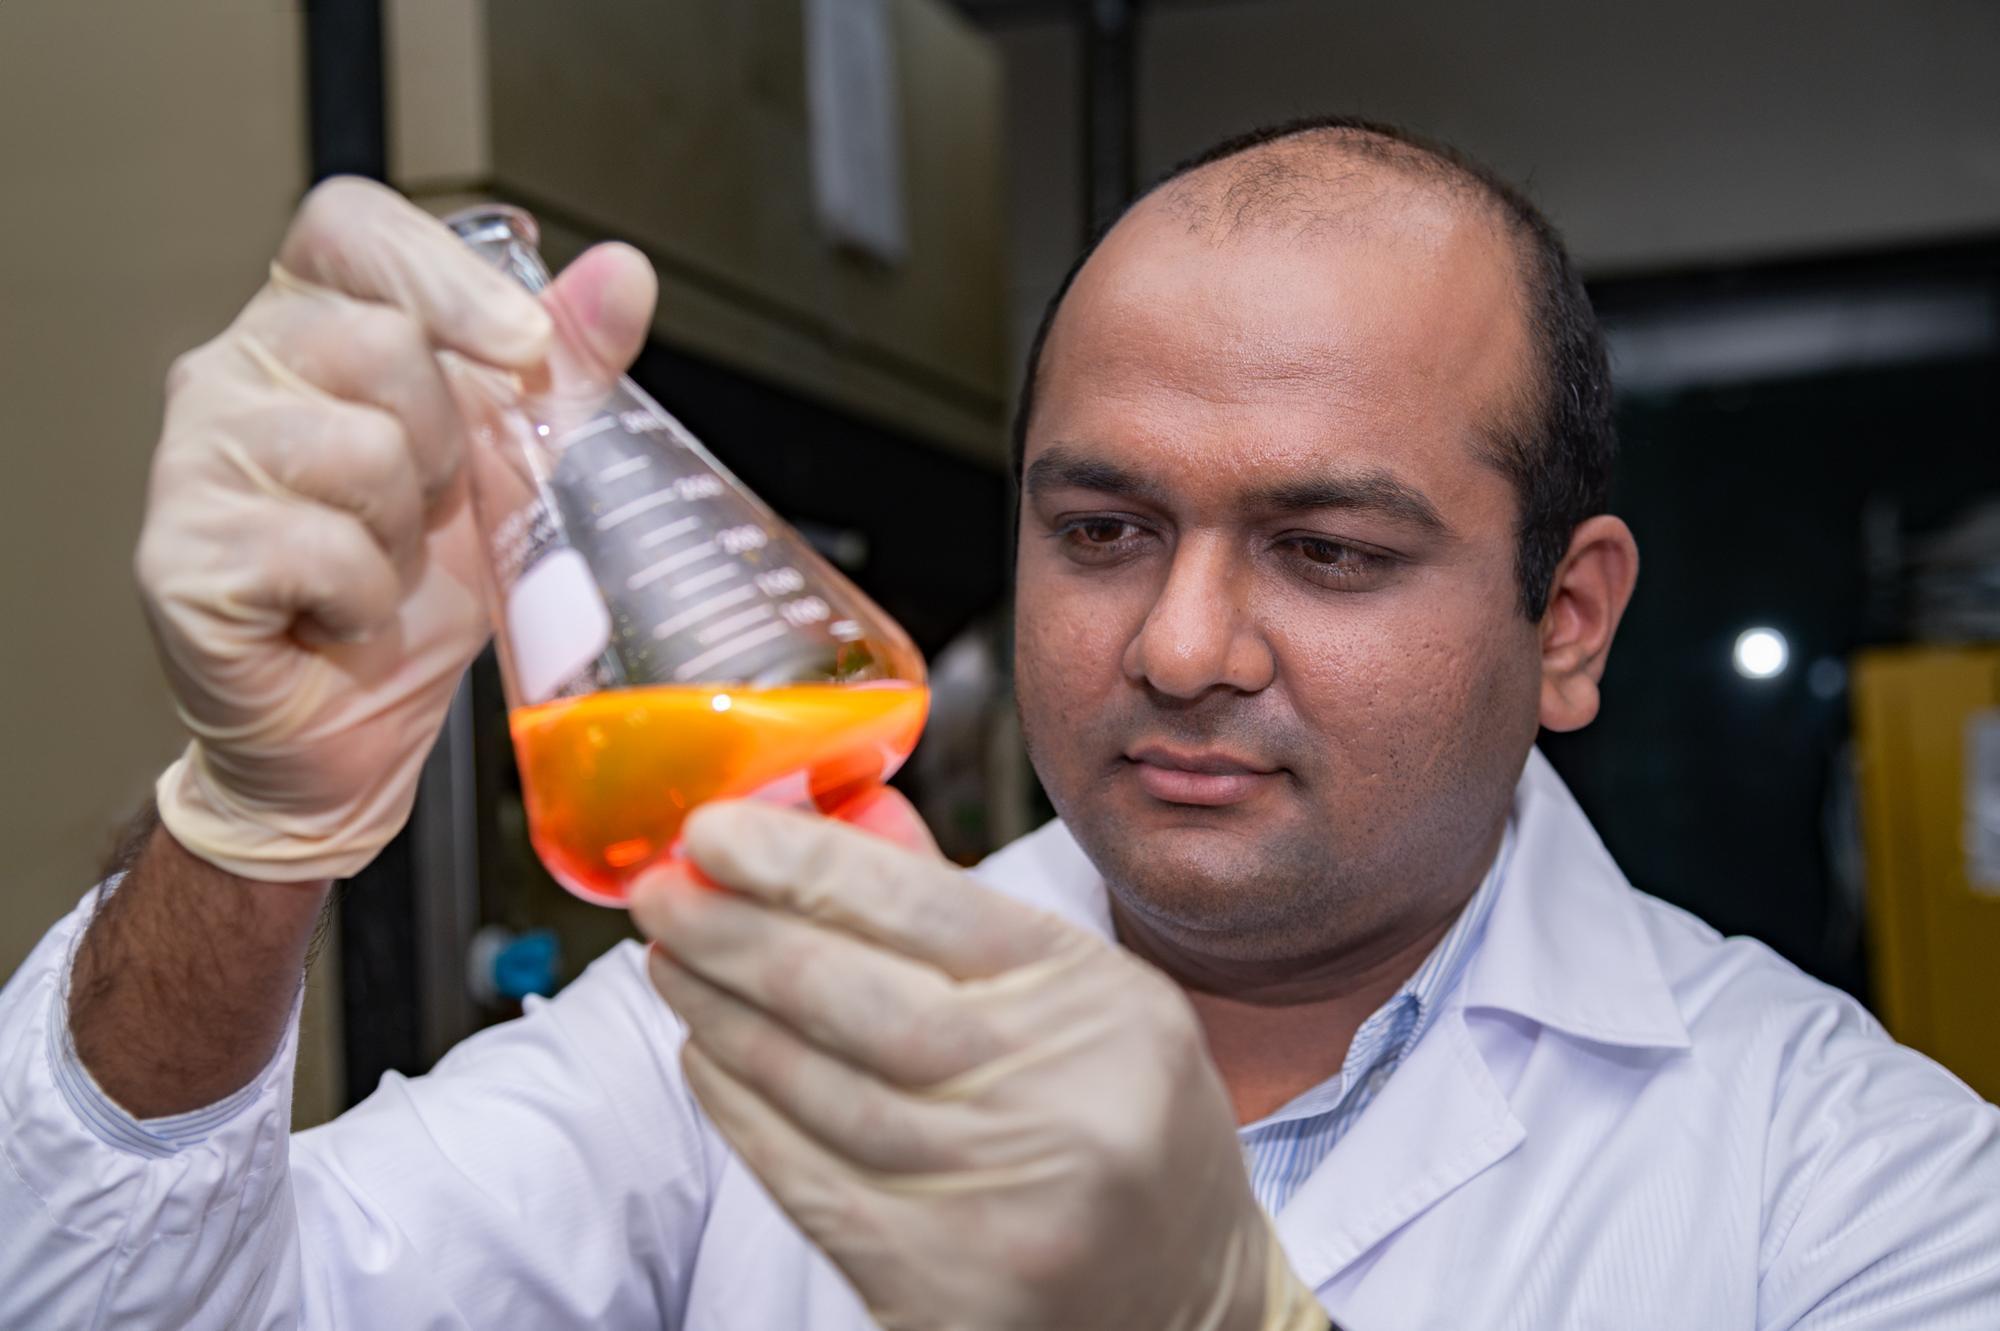 Postdoctoral researcher Vaibhav Pramod Charpe from NTHU examines persistent organic pollutants (POPs) that have been dyed.